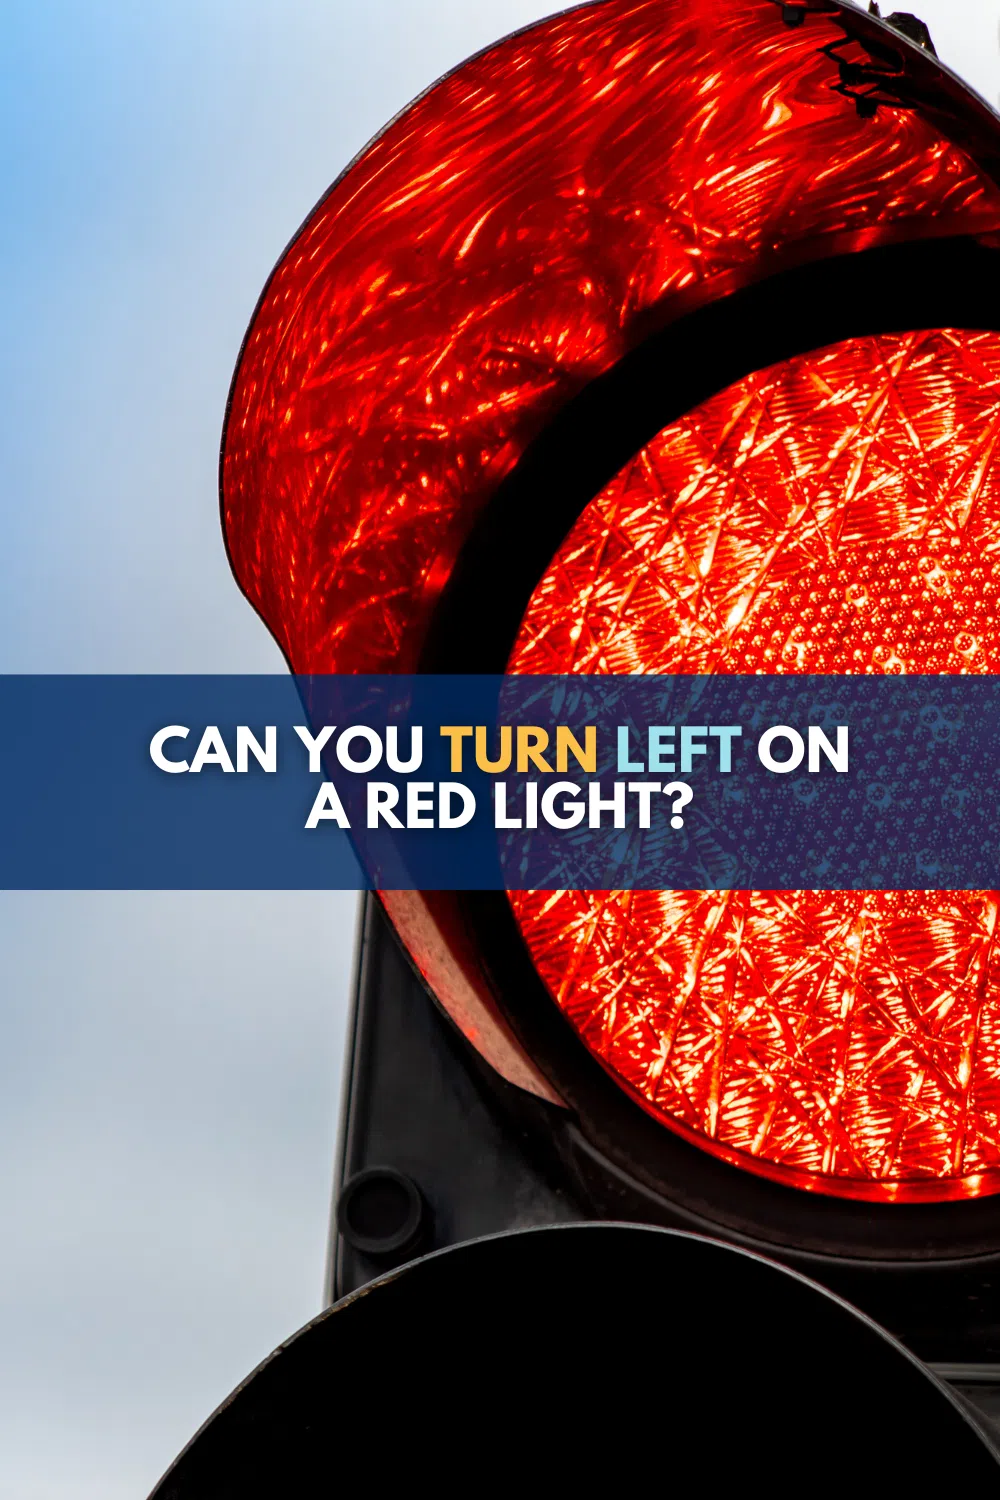 Can You Turn Left On A Red Light In Michigan?